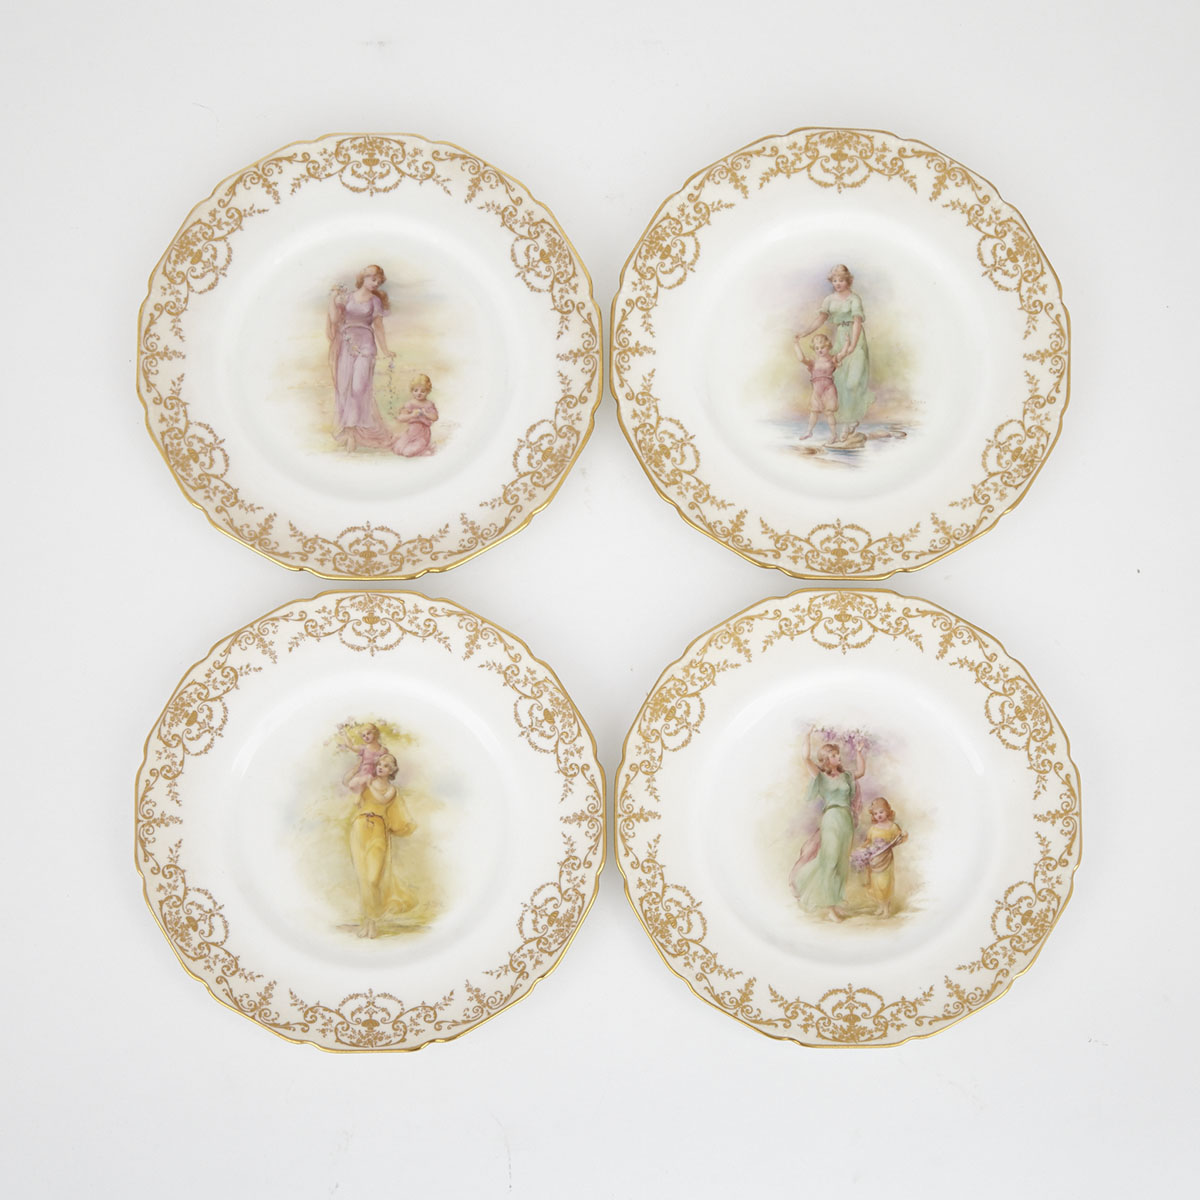 Four Royal Doulton Mother and Child Plates, c.1907/08